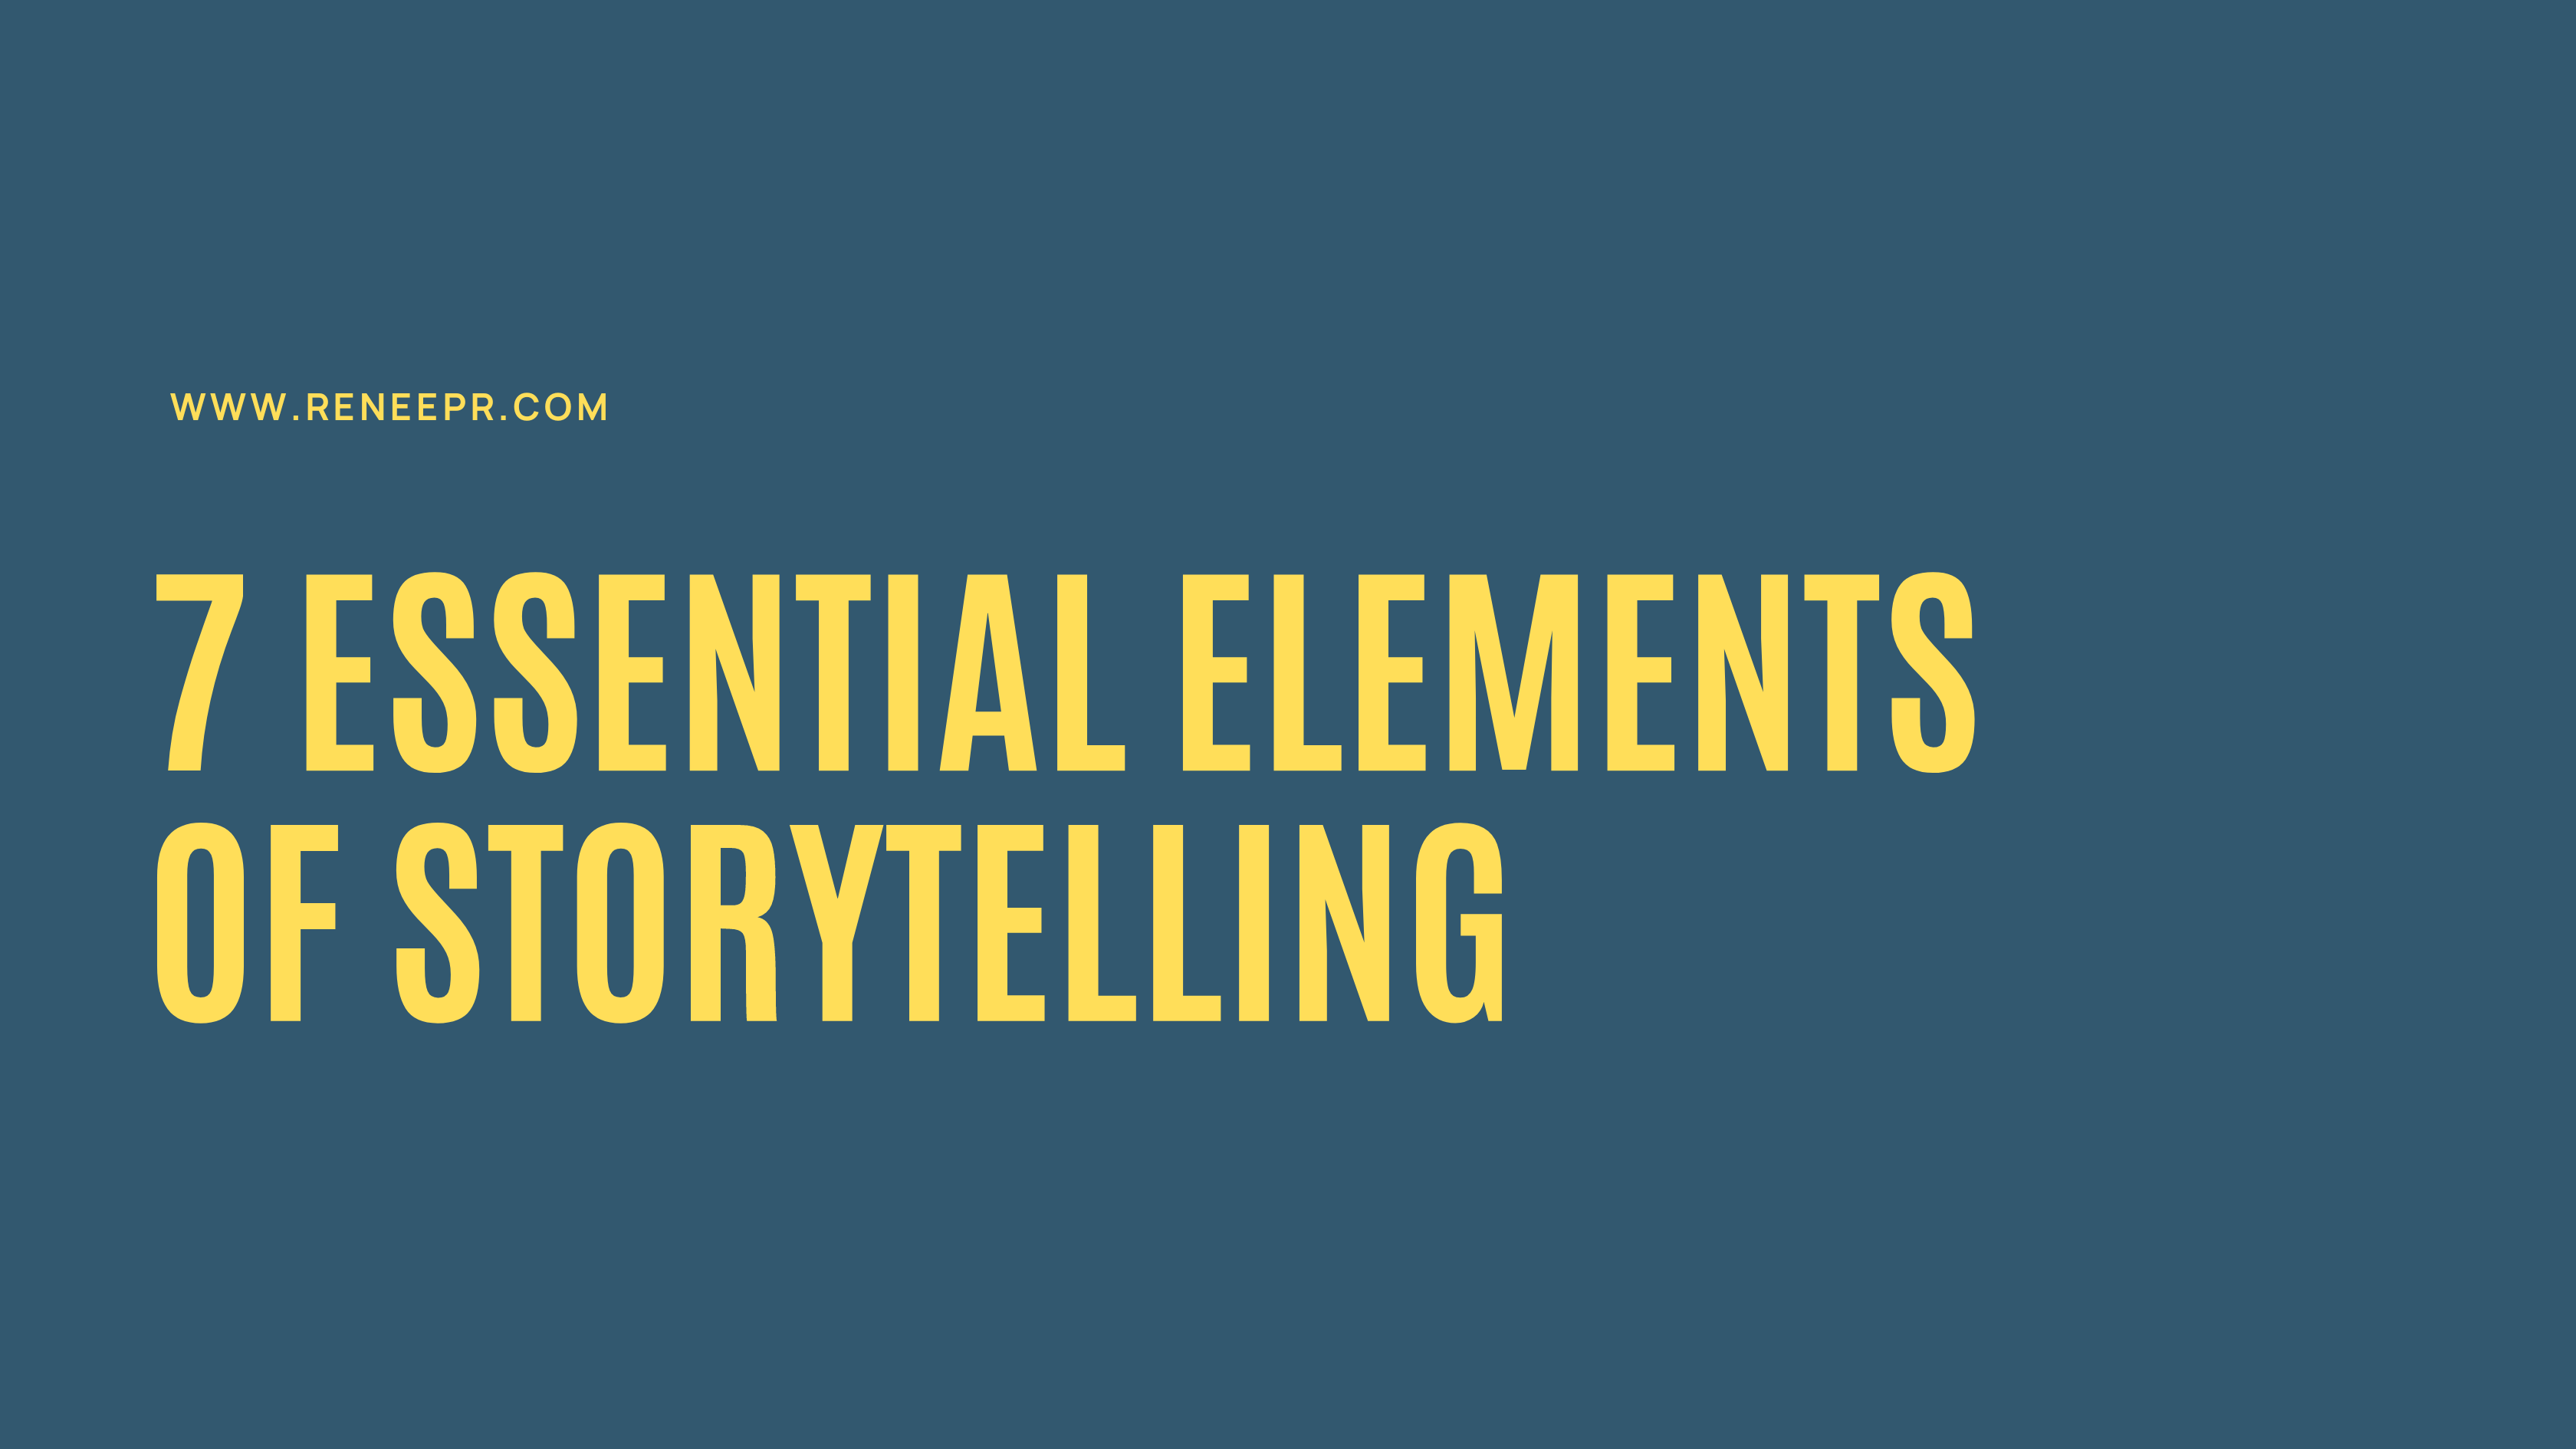 ESSENTIAL ELEMENTS OF STORYTELLING